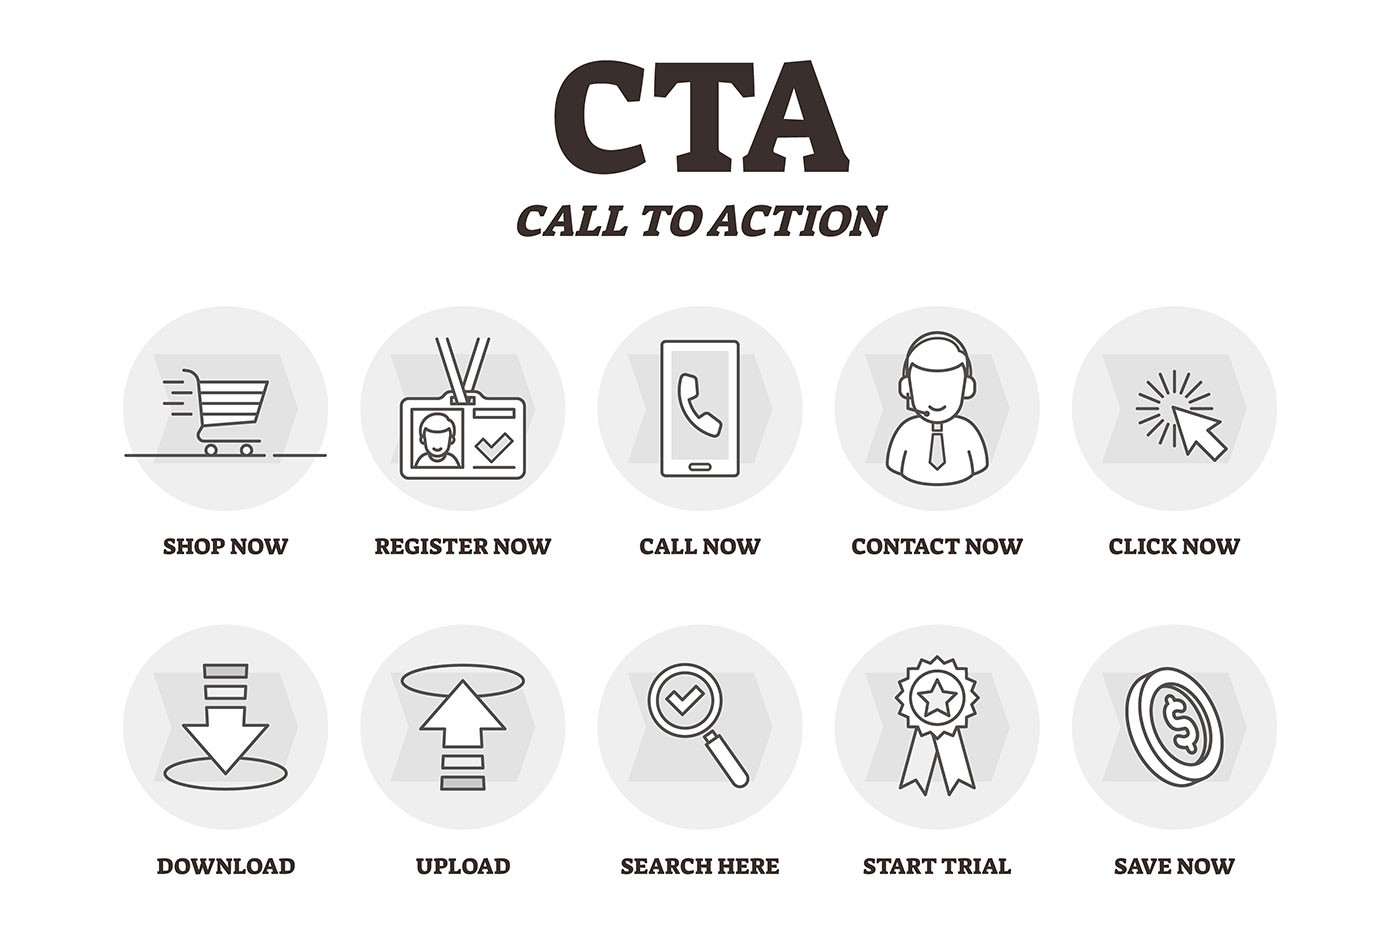 7 Catchy Call-to-Action Marketing Tips that Work